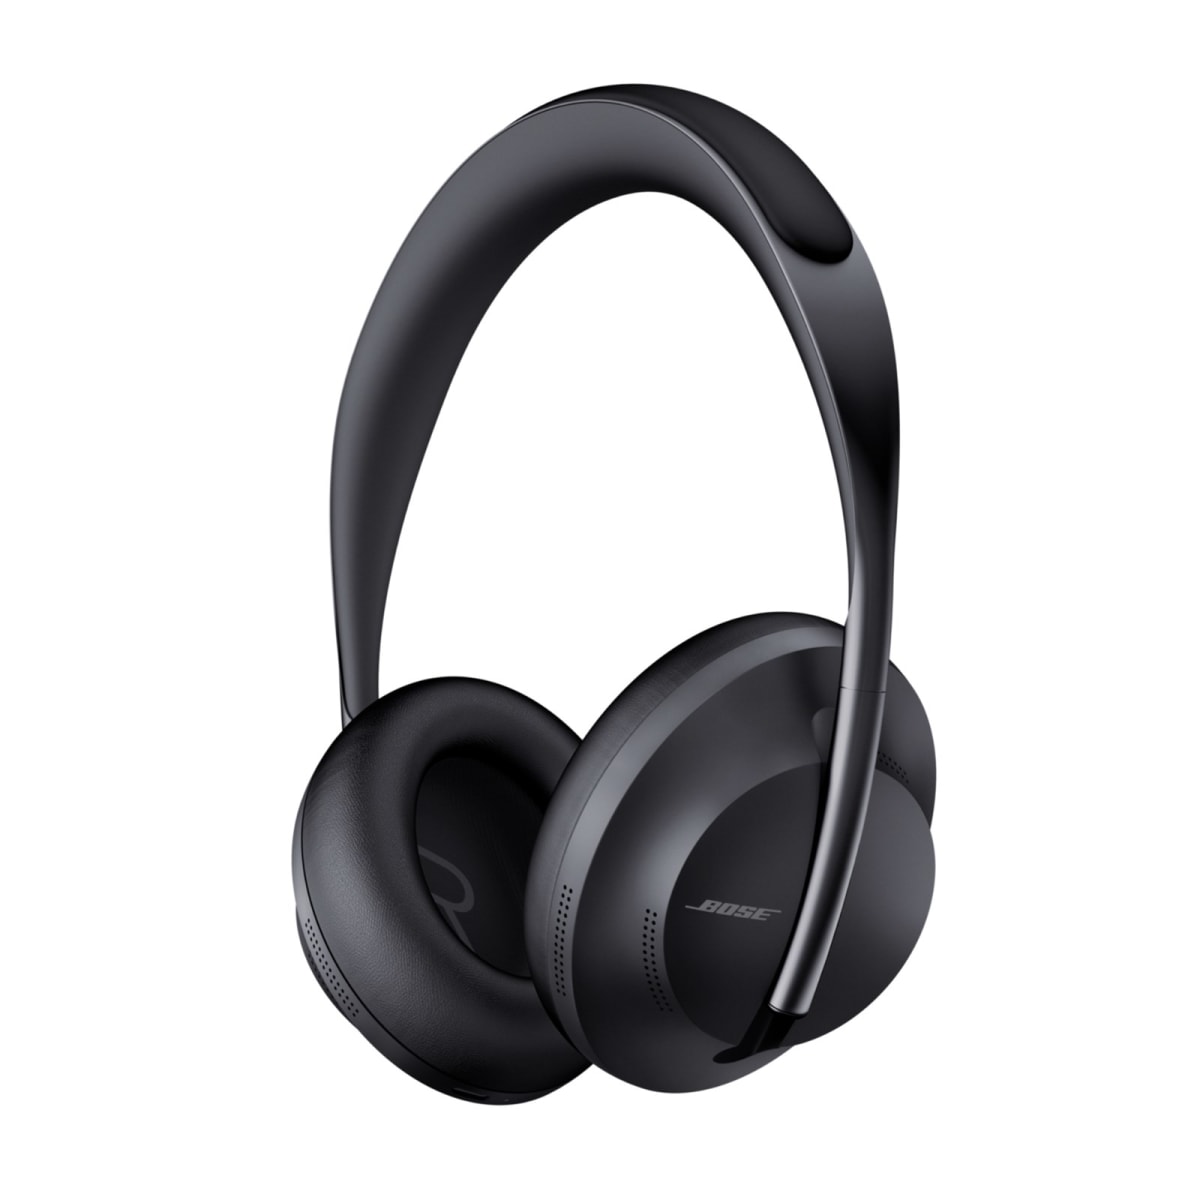 Bose NC700 Noise Canceling Bluetooth Headphones for $249.99